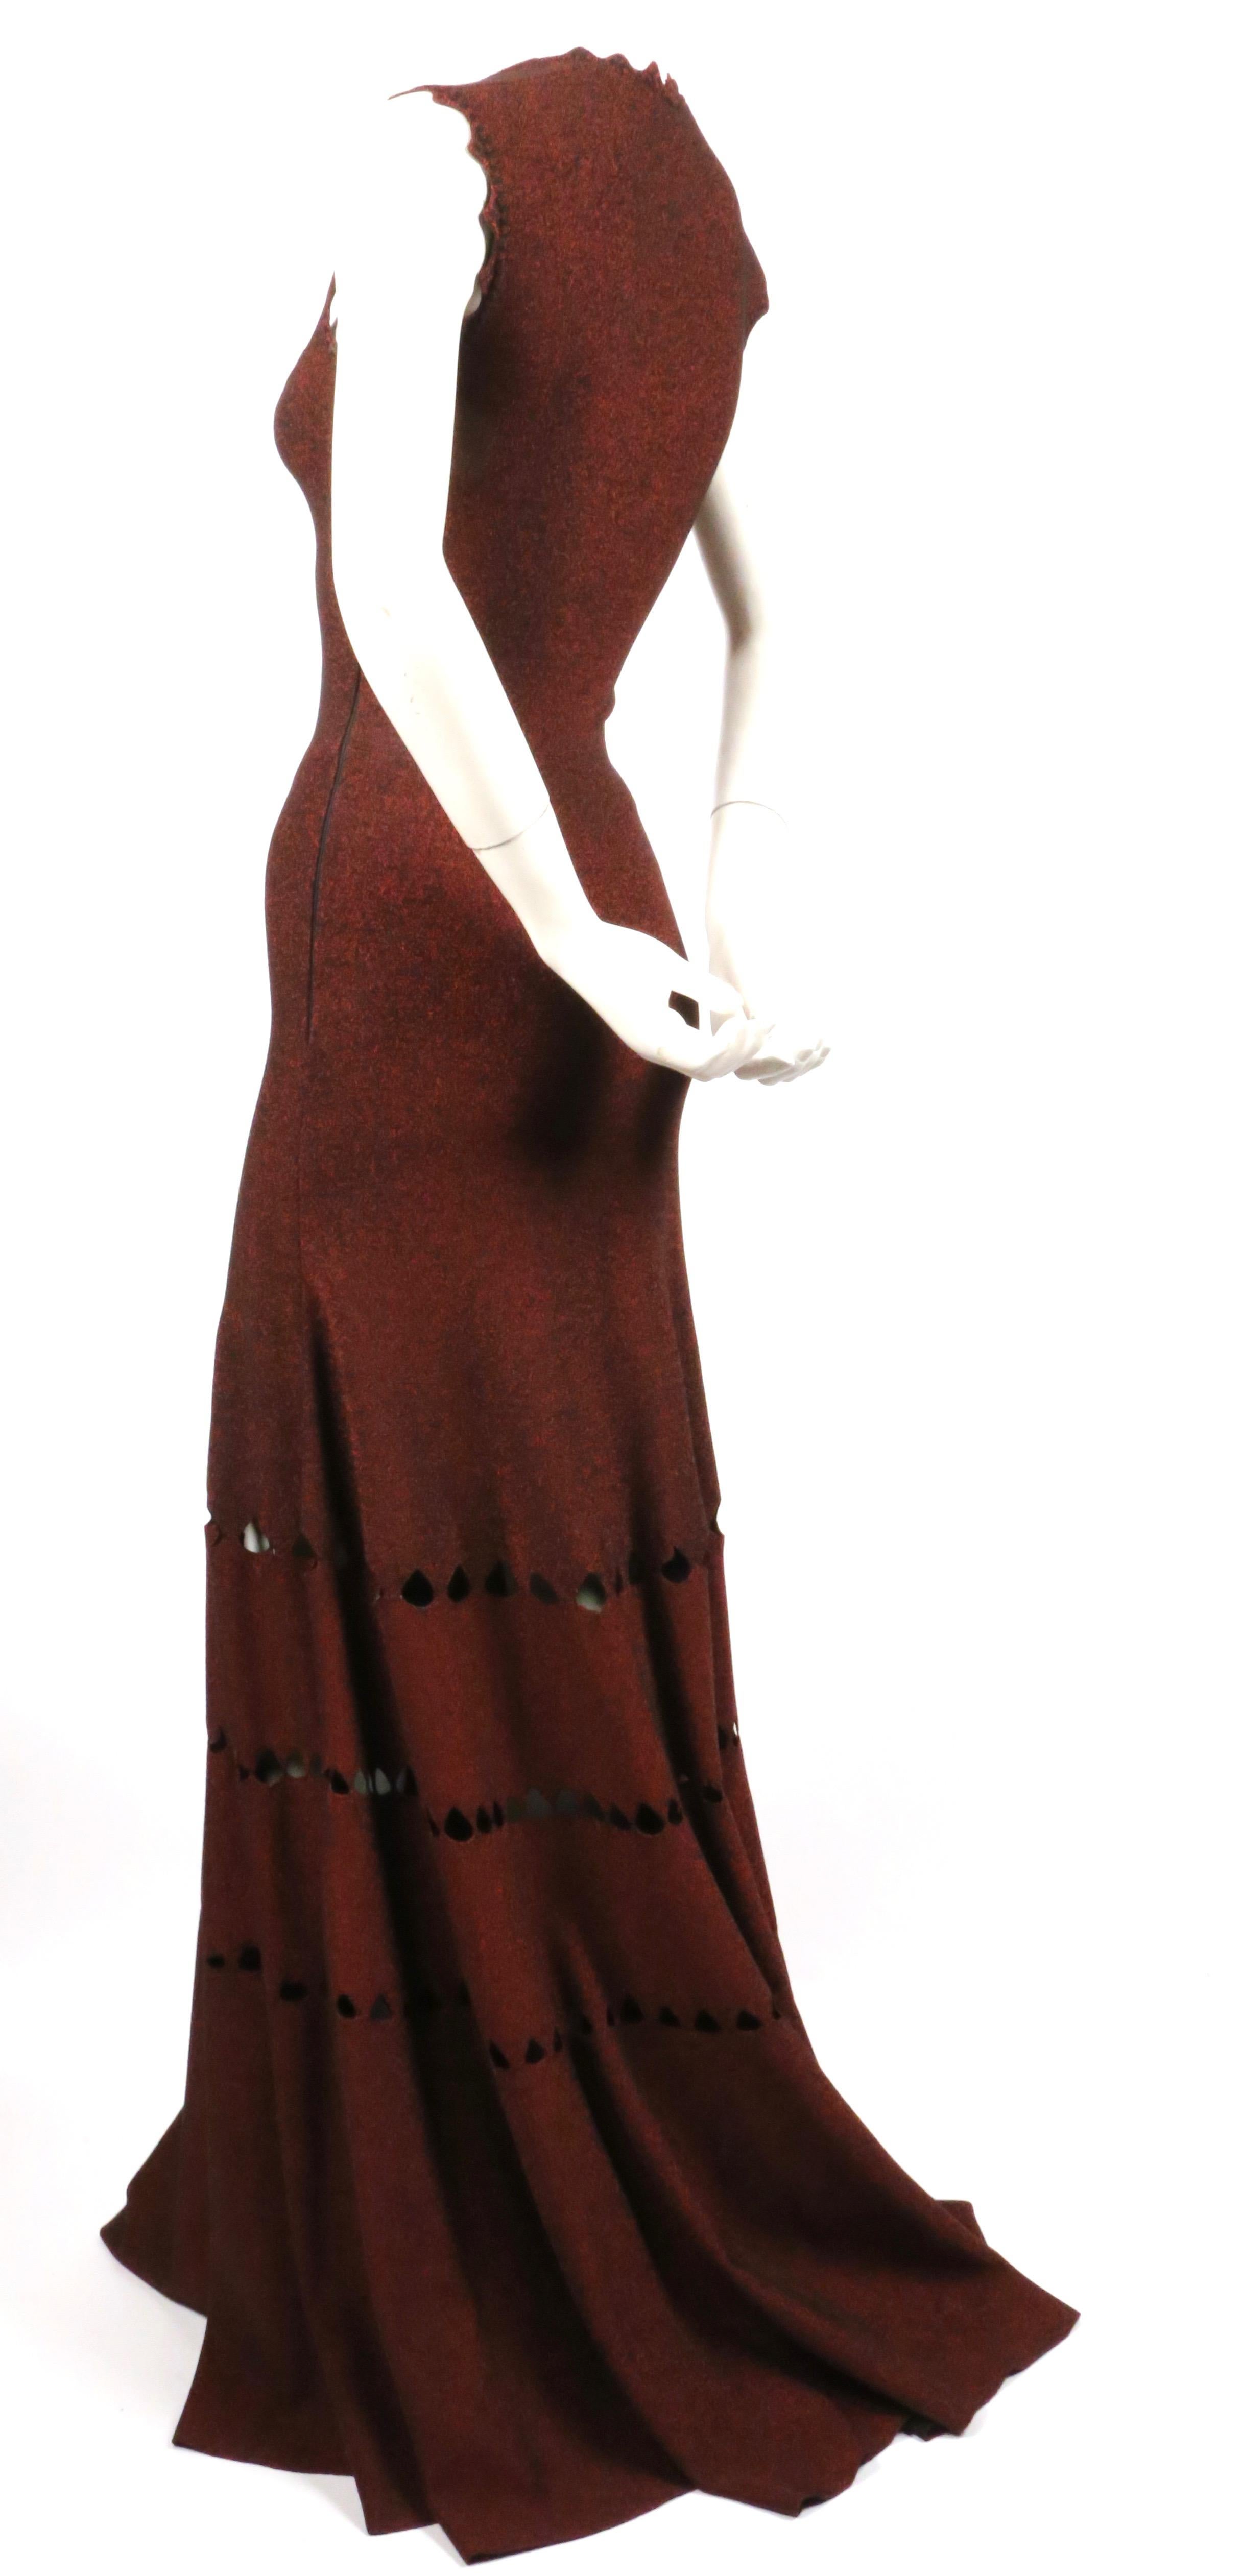 Dramatic, floor-length gown with geometric cut-outs and scalloped hemline designed by Azzedine Alaia. Color is an unusual, metallic burgundy-copper tone. Labeled a French size 36. Fits a US 0-2. Approximate measurements (unstretched): bust 27